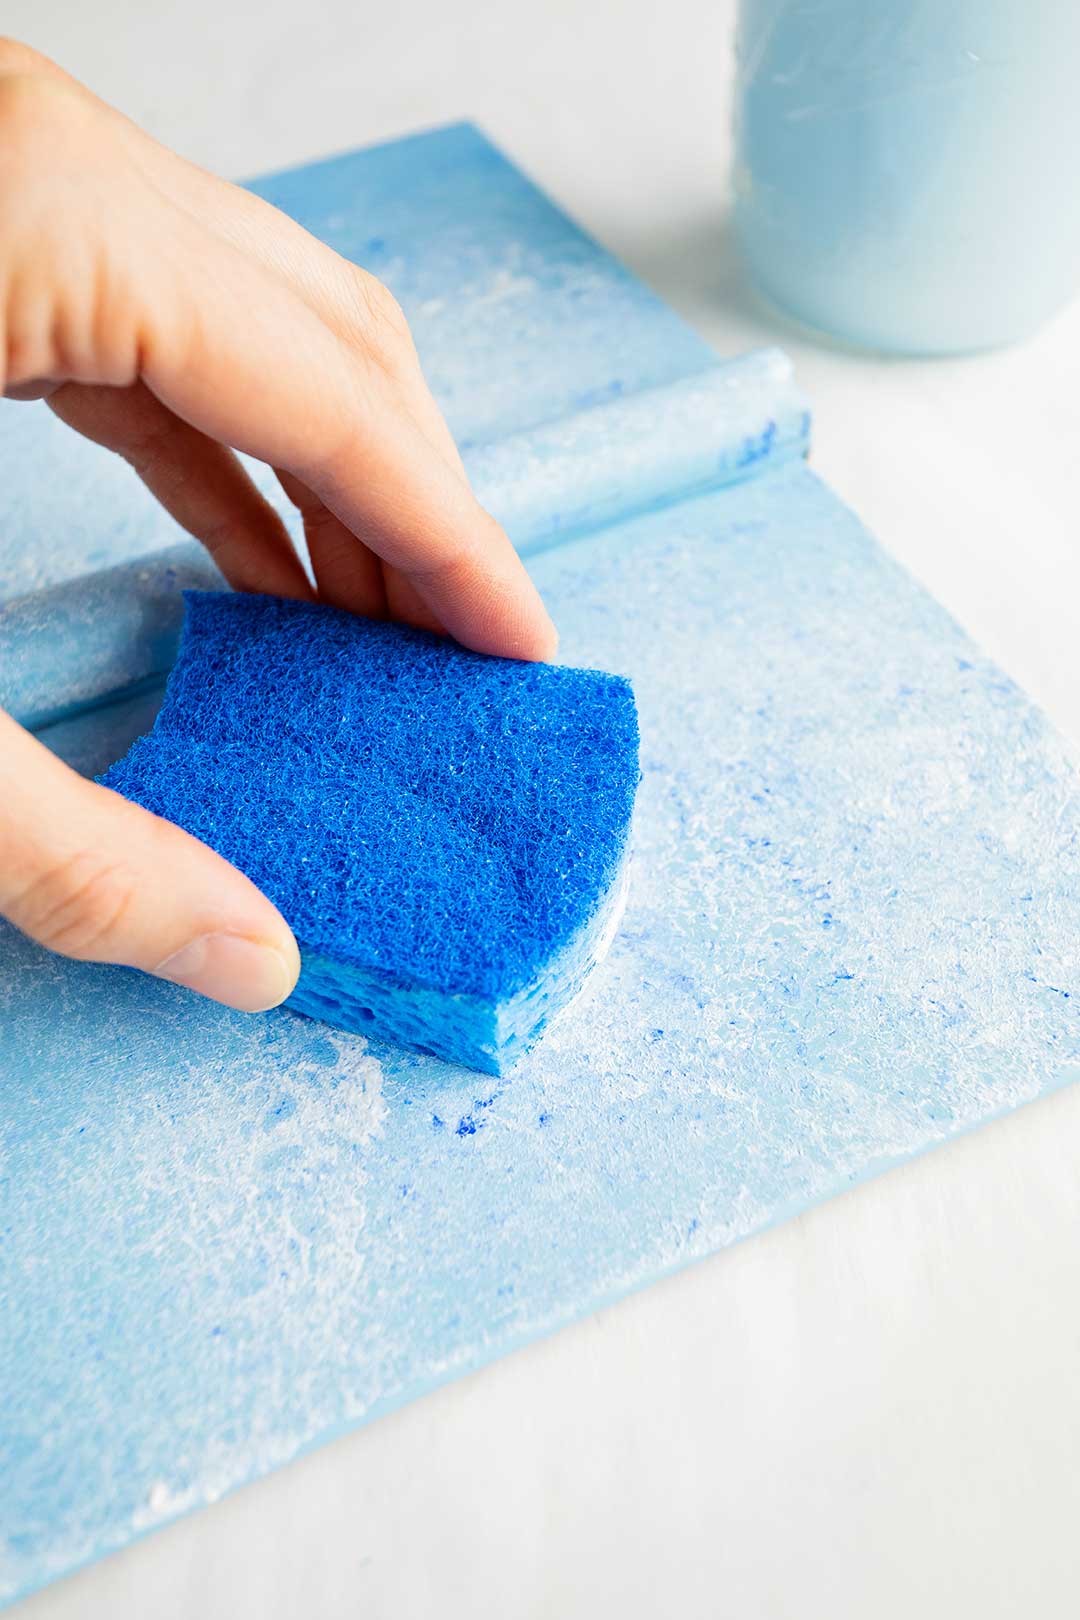 Person using blue kitchen sponge to sponge paint white on book cover with a light blue base.